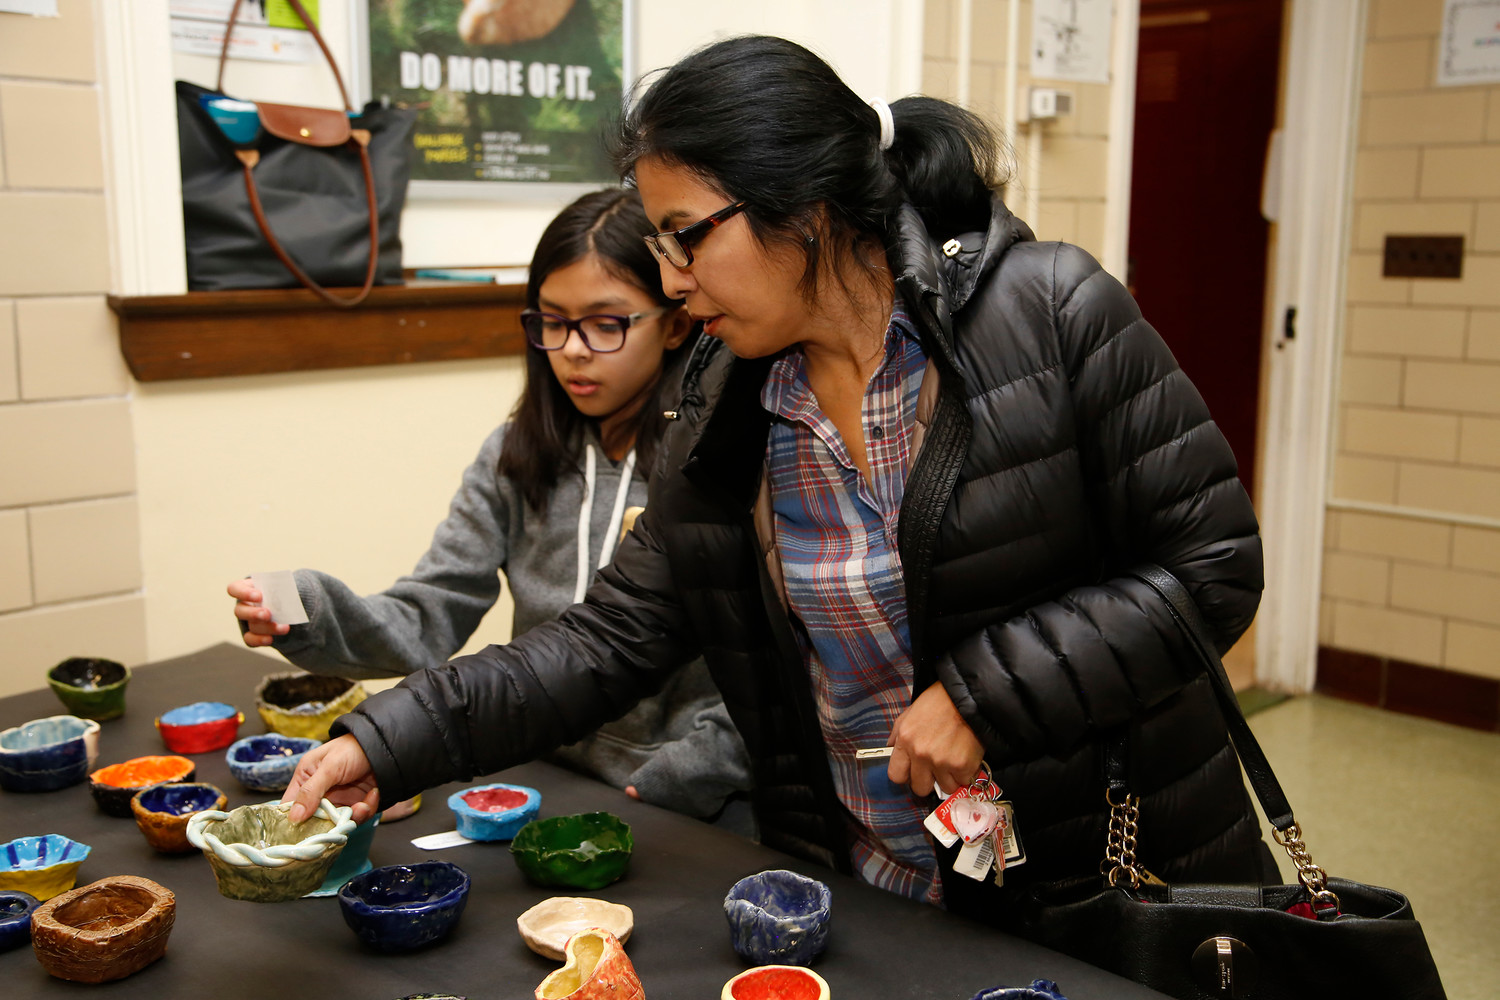 Emily Valdebenito, 9, and her mom, Ledda, picked out a handmade bowl at the Empty Bowls fundraiser on Nov. 30.